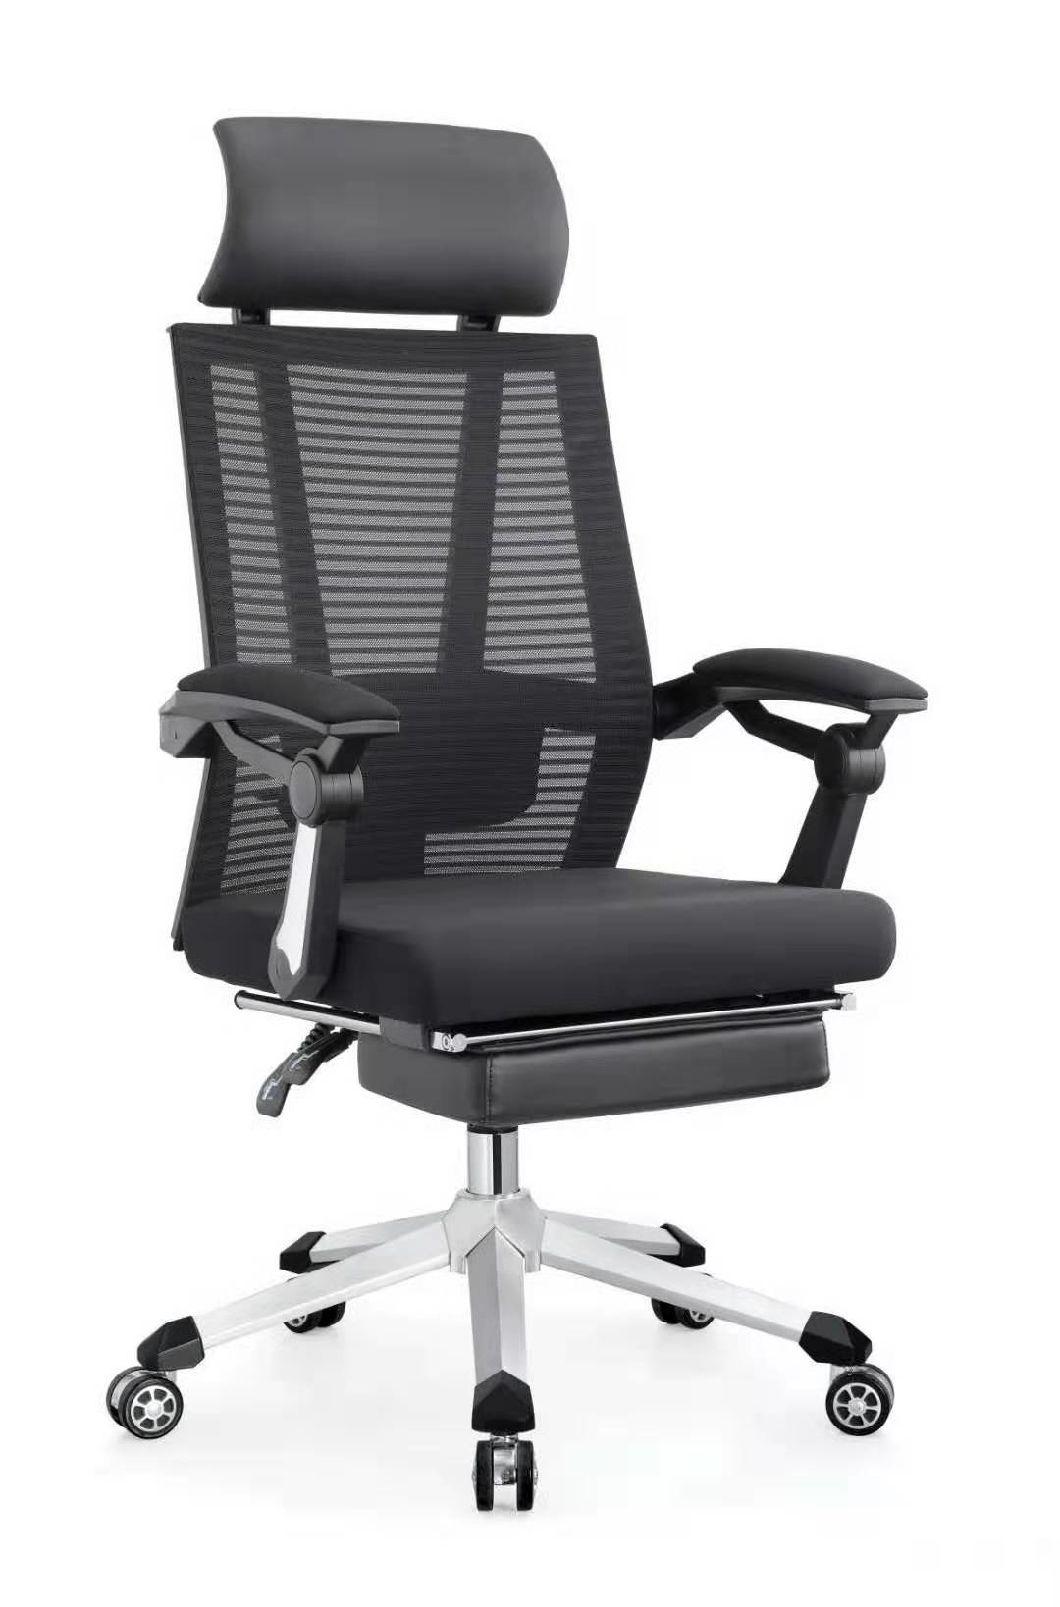 Modern Adjustable Lay Down Office Chair-6128A